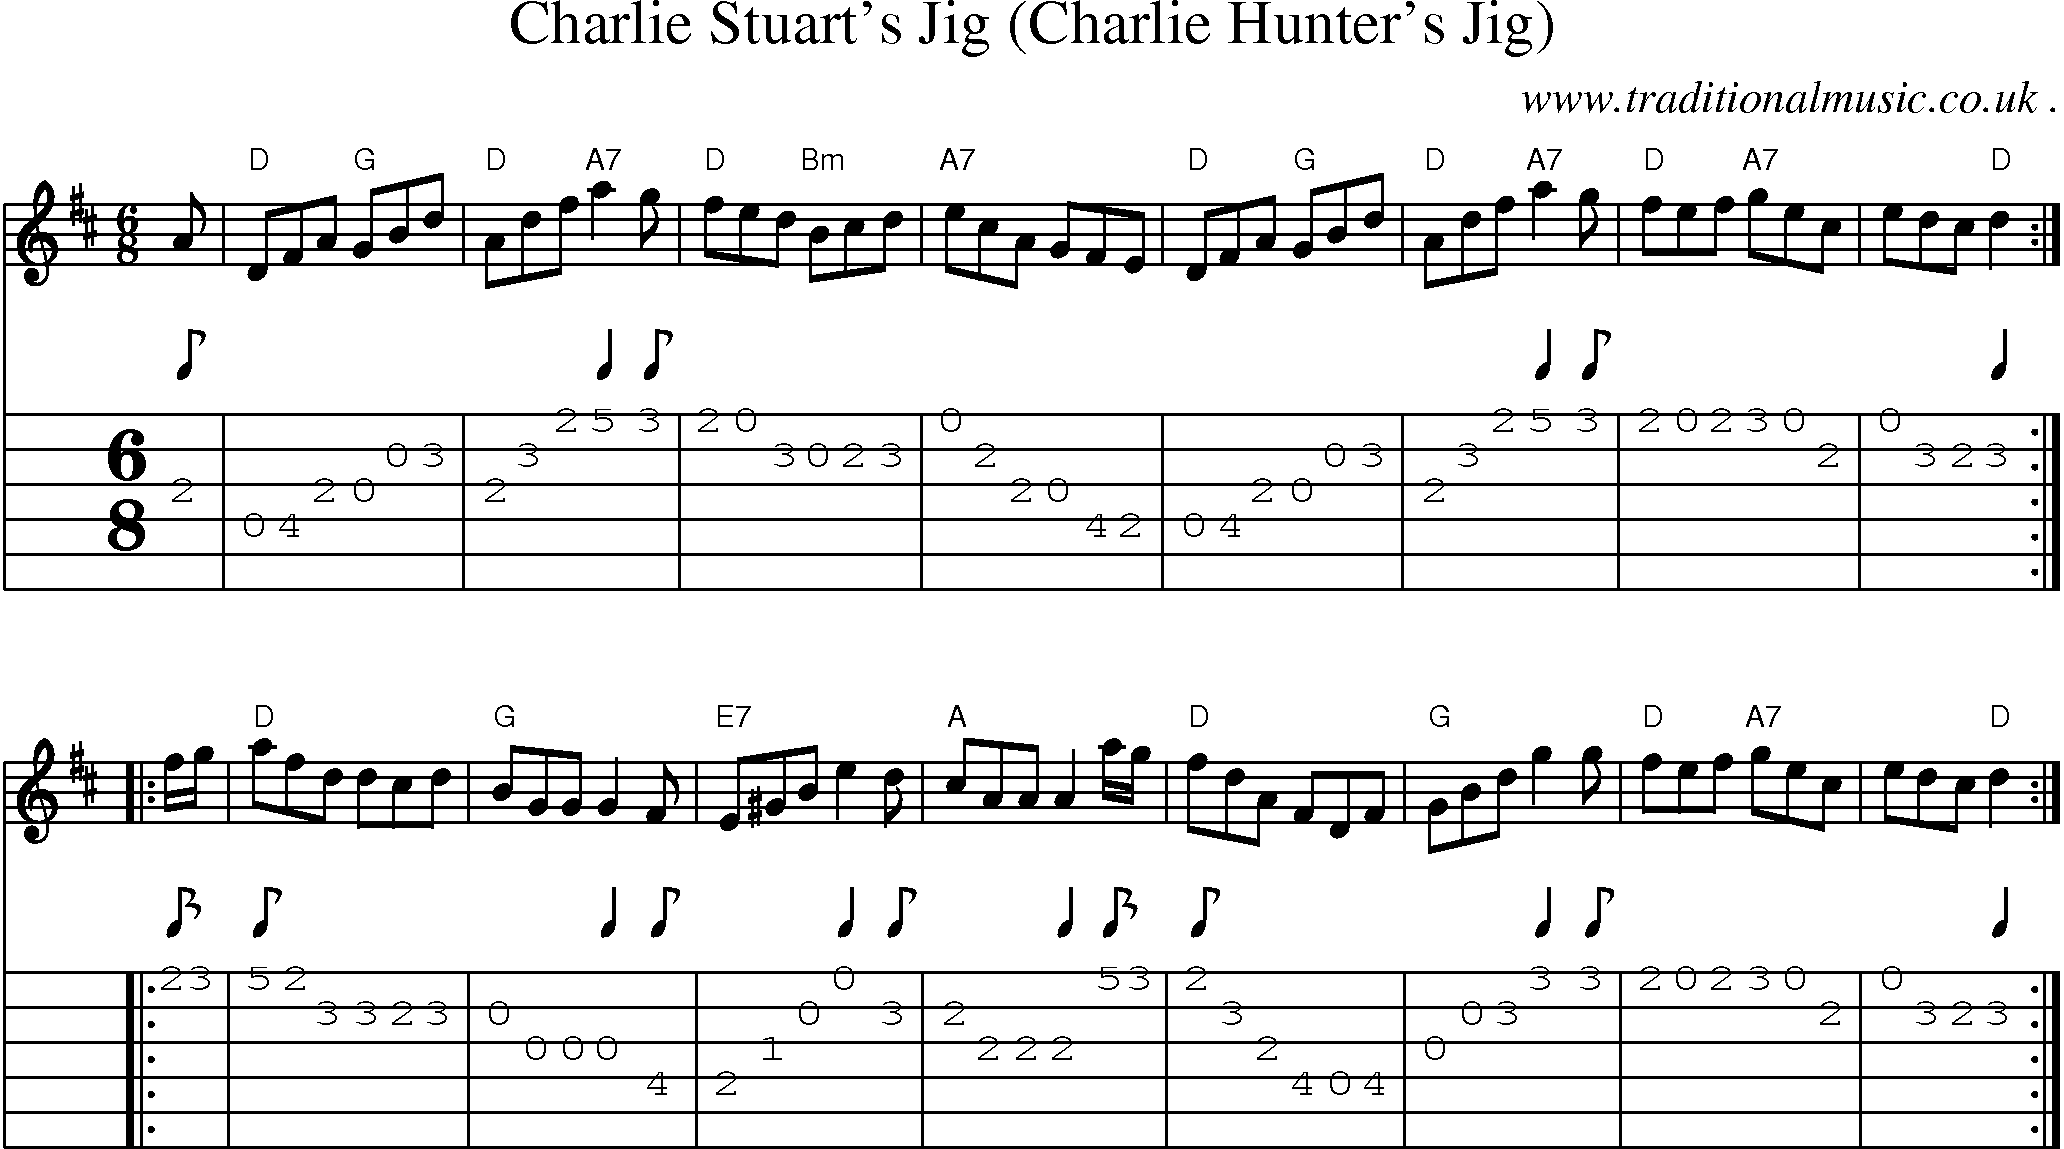 Sheet-music  score, Chords and Guitar Tabs for Charlie Stuarts Jig Charlie Hunters Jig